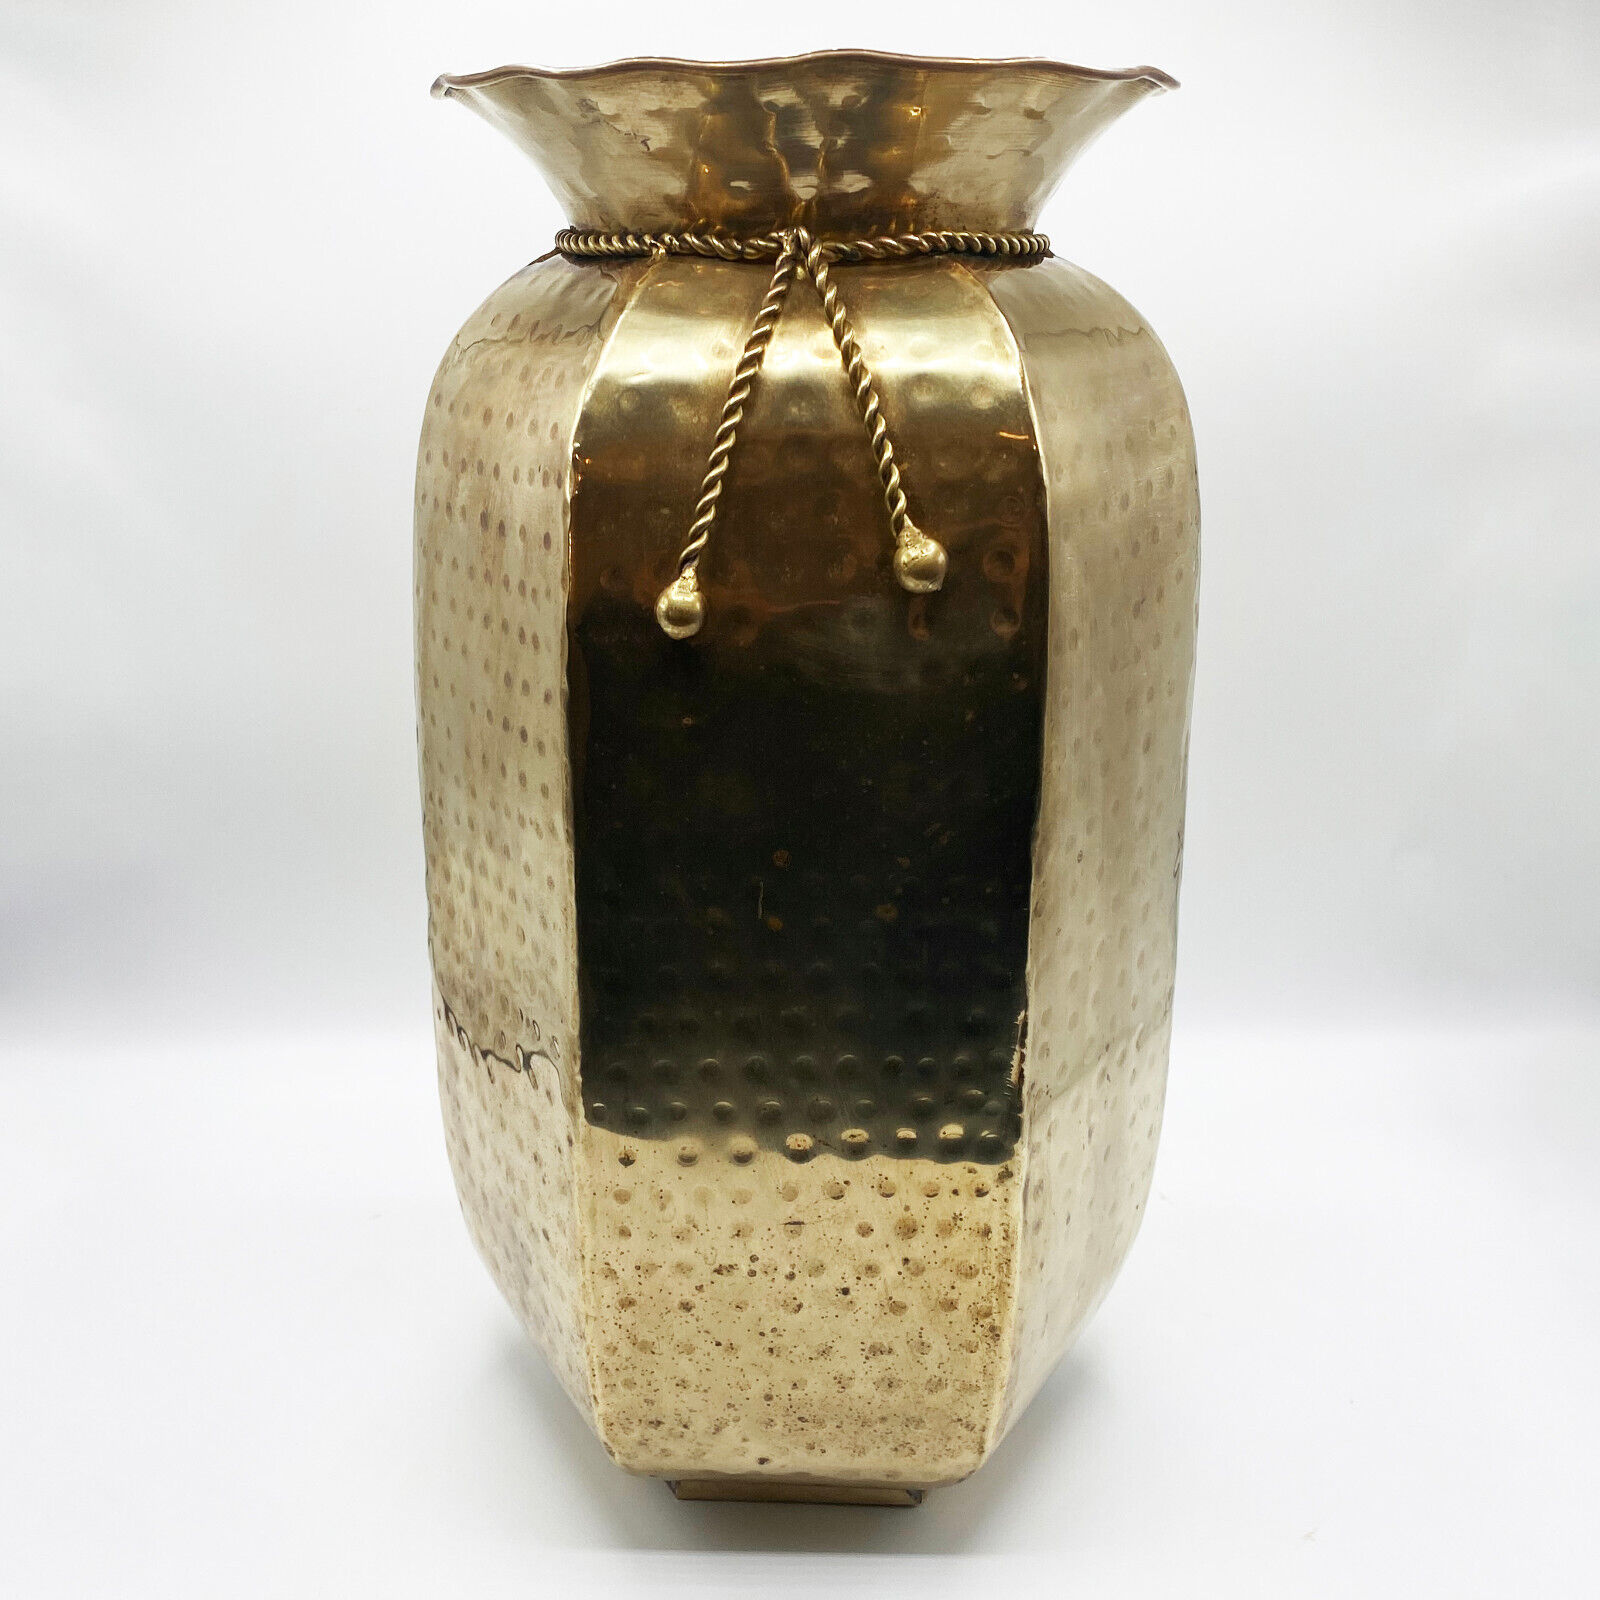 Vintage Hammered Brass Oversized Tall Vase with Rope Detail - Made in India